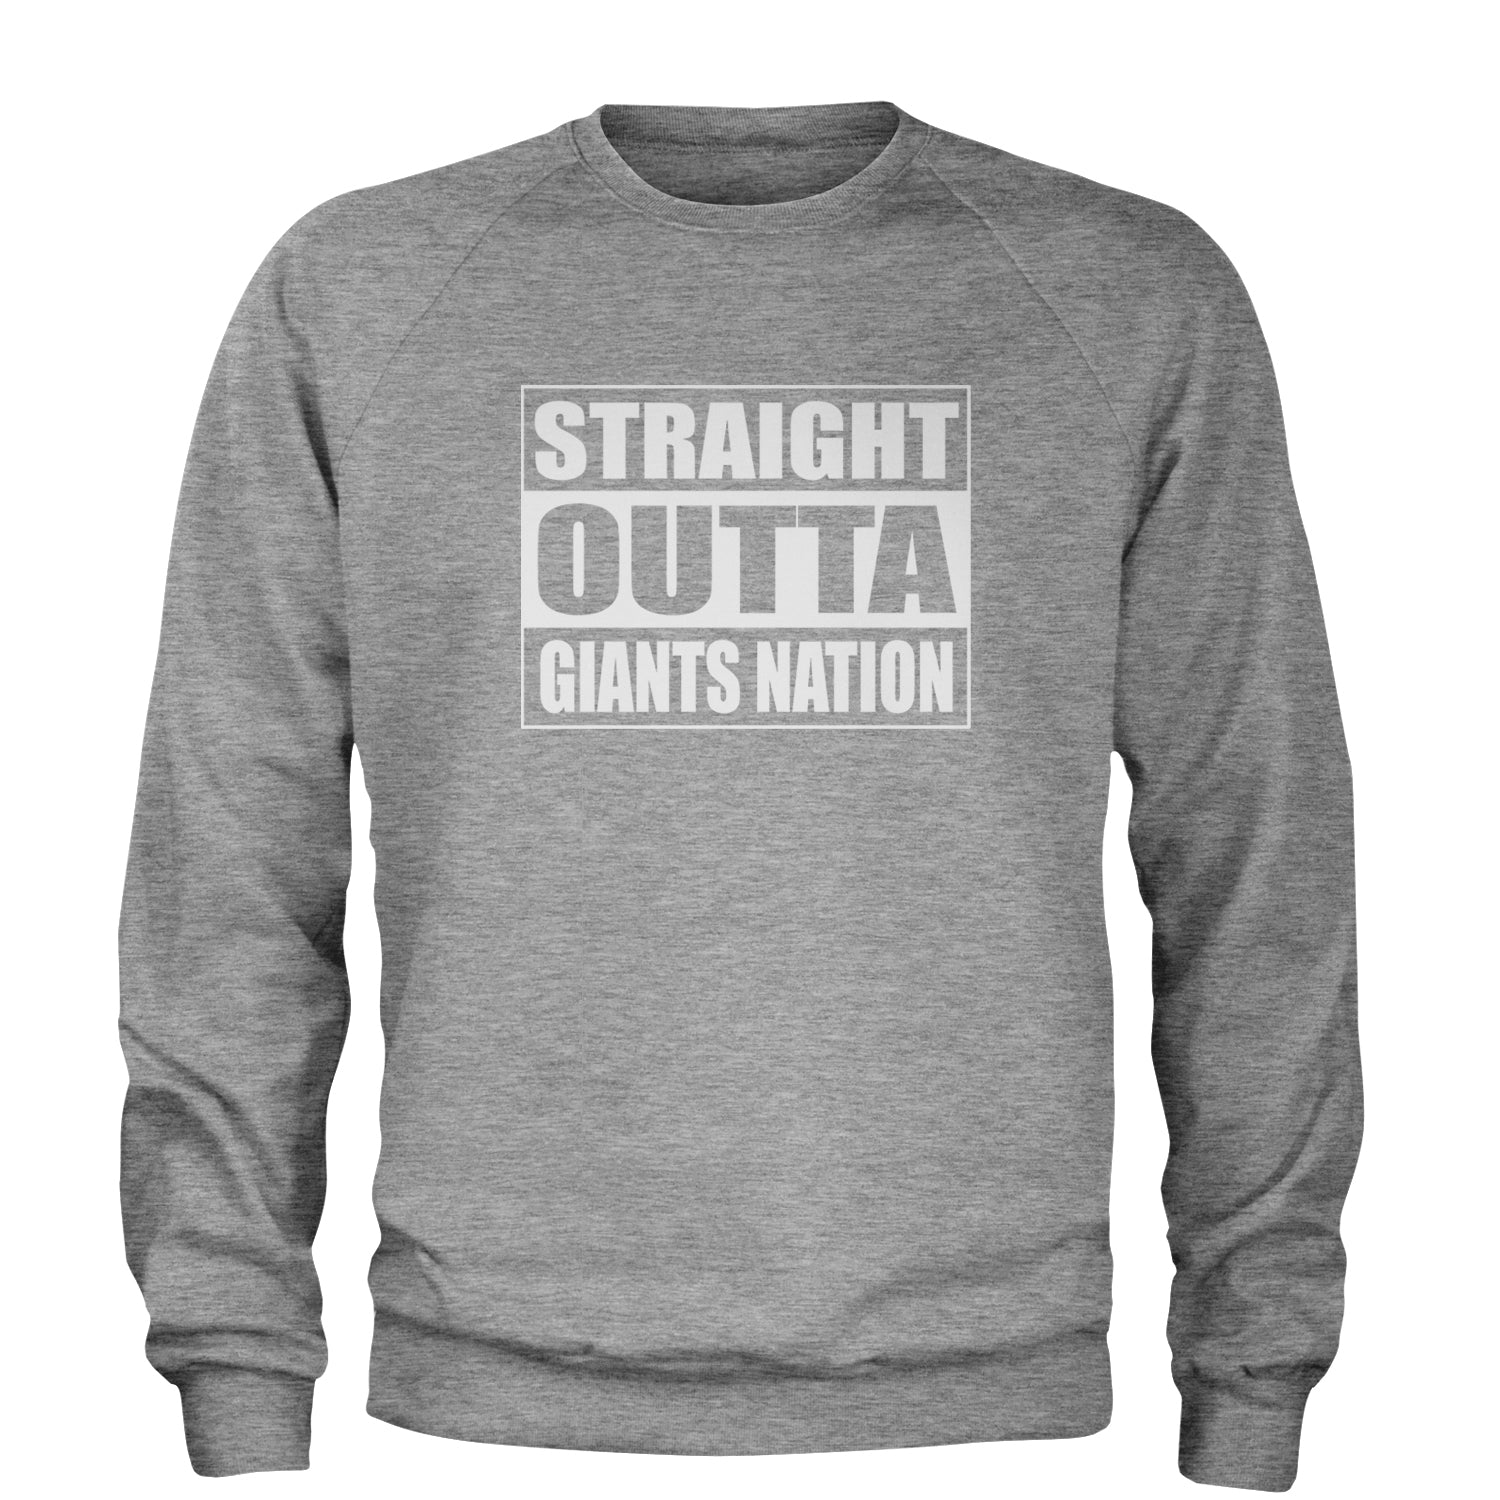 Straight Outta Giants Nation Adult Crewneck Sweatshirt bleed, blue, football, giants, new, ny, york by Expression Tees